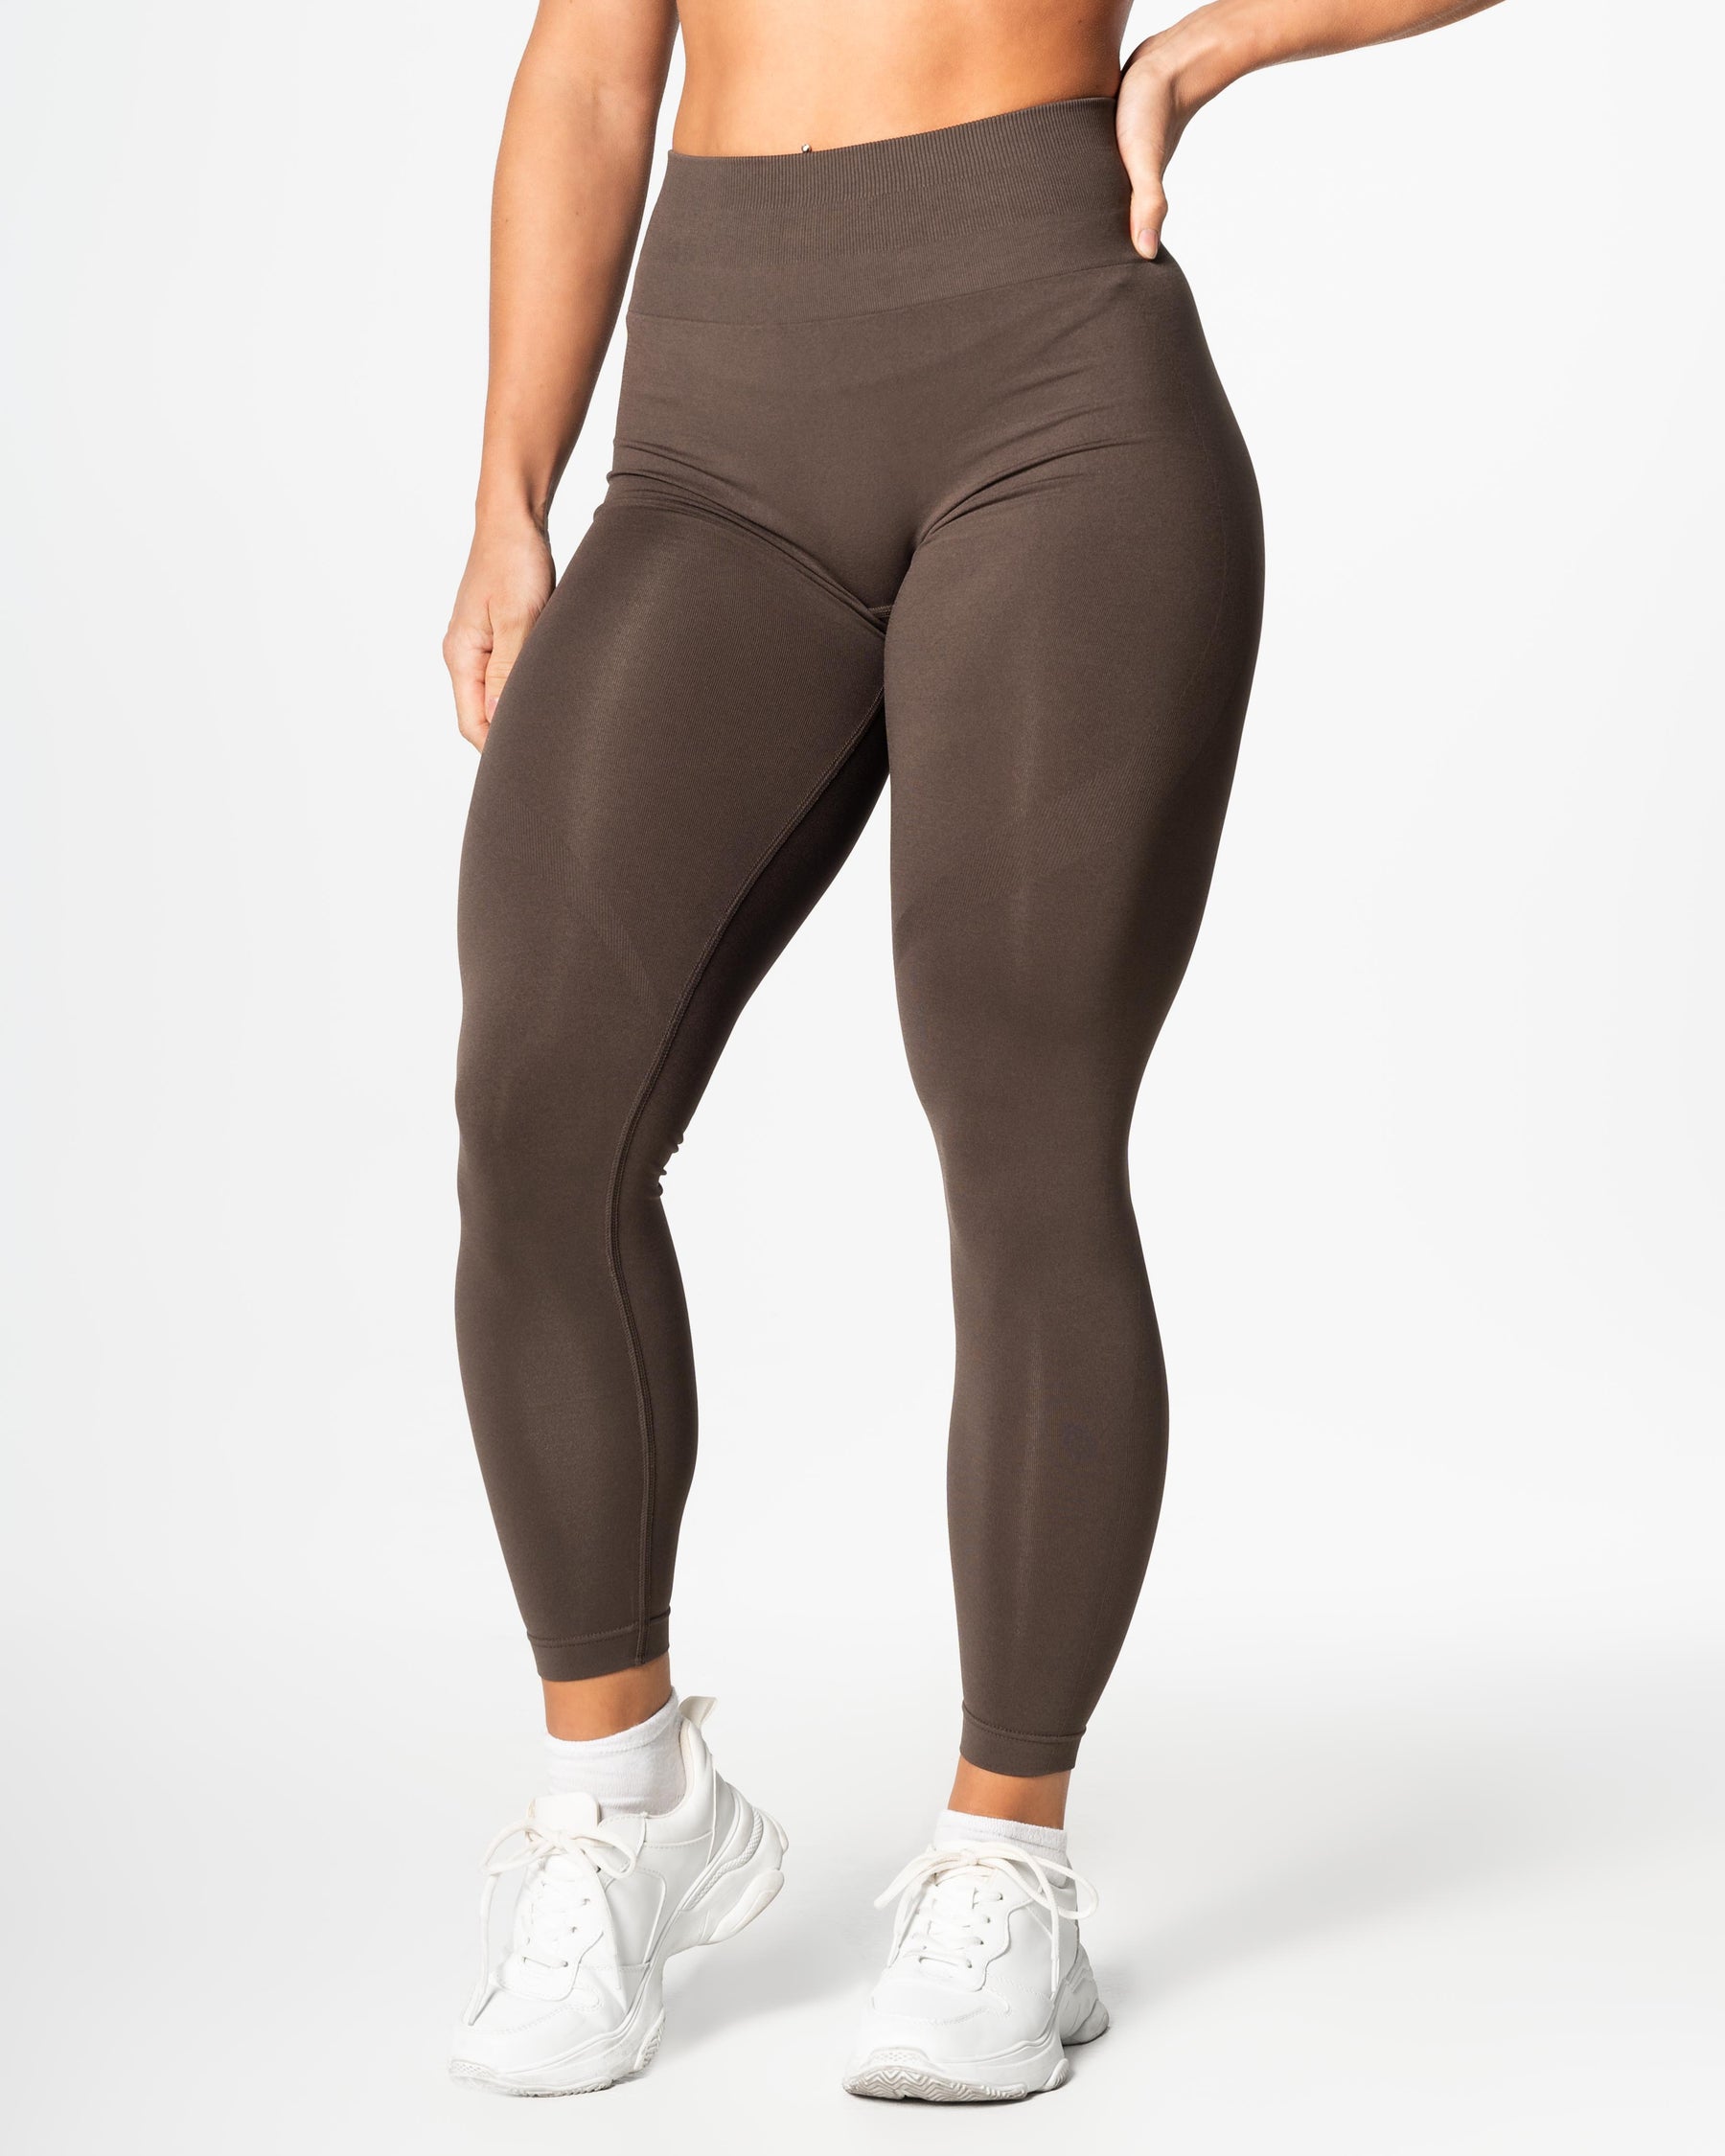 Prime Seamless Tights - Brown